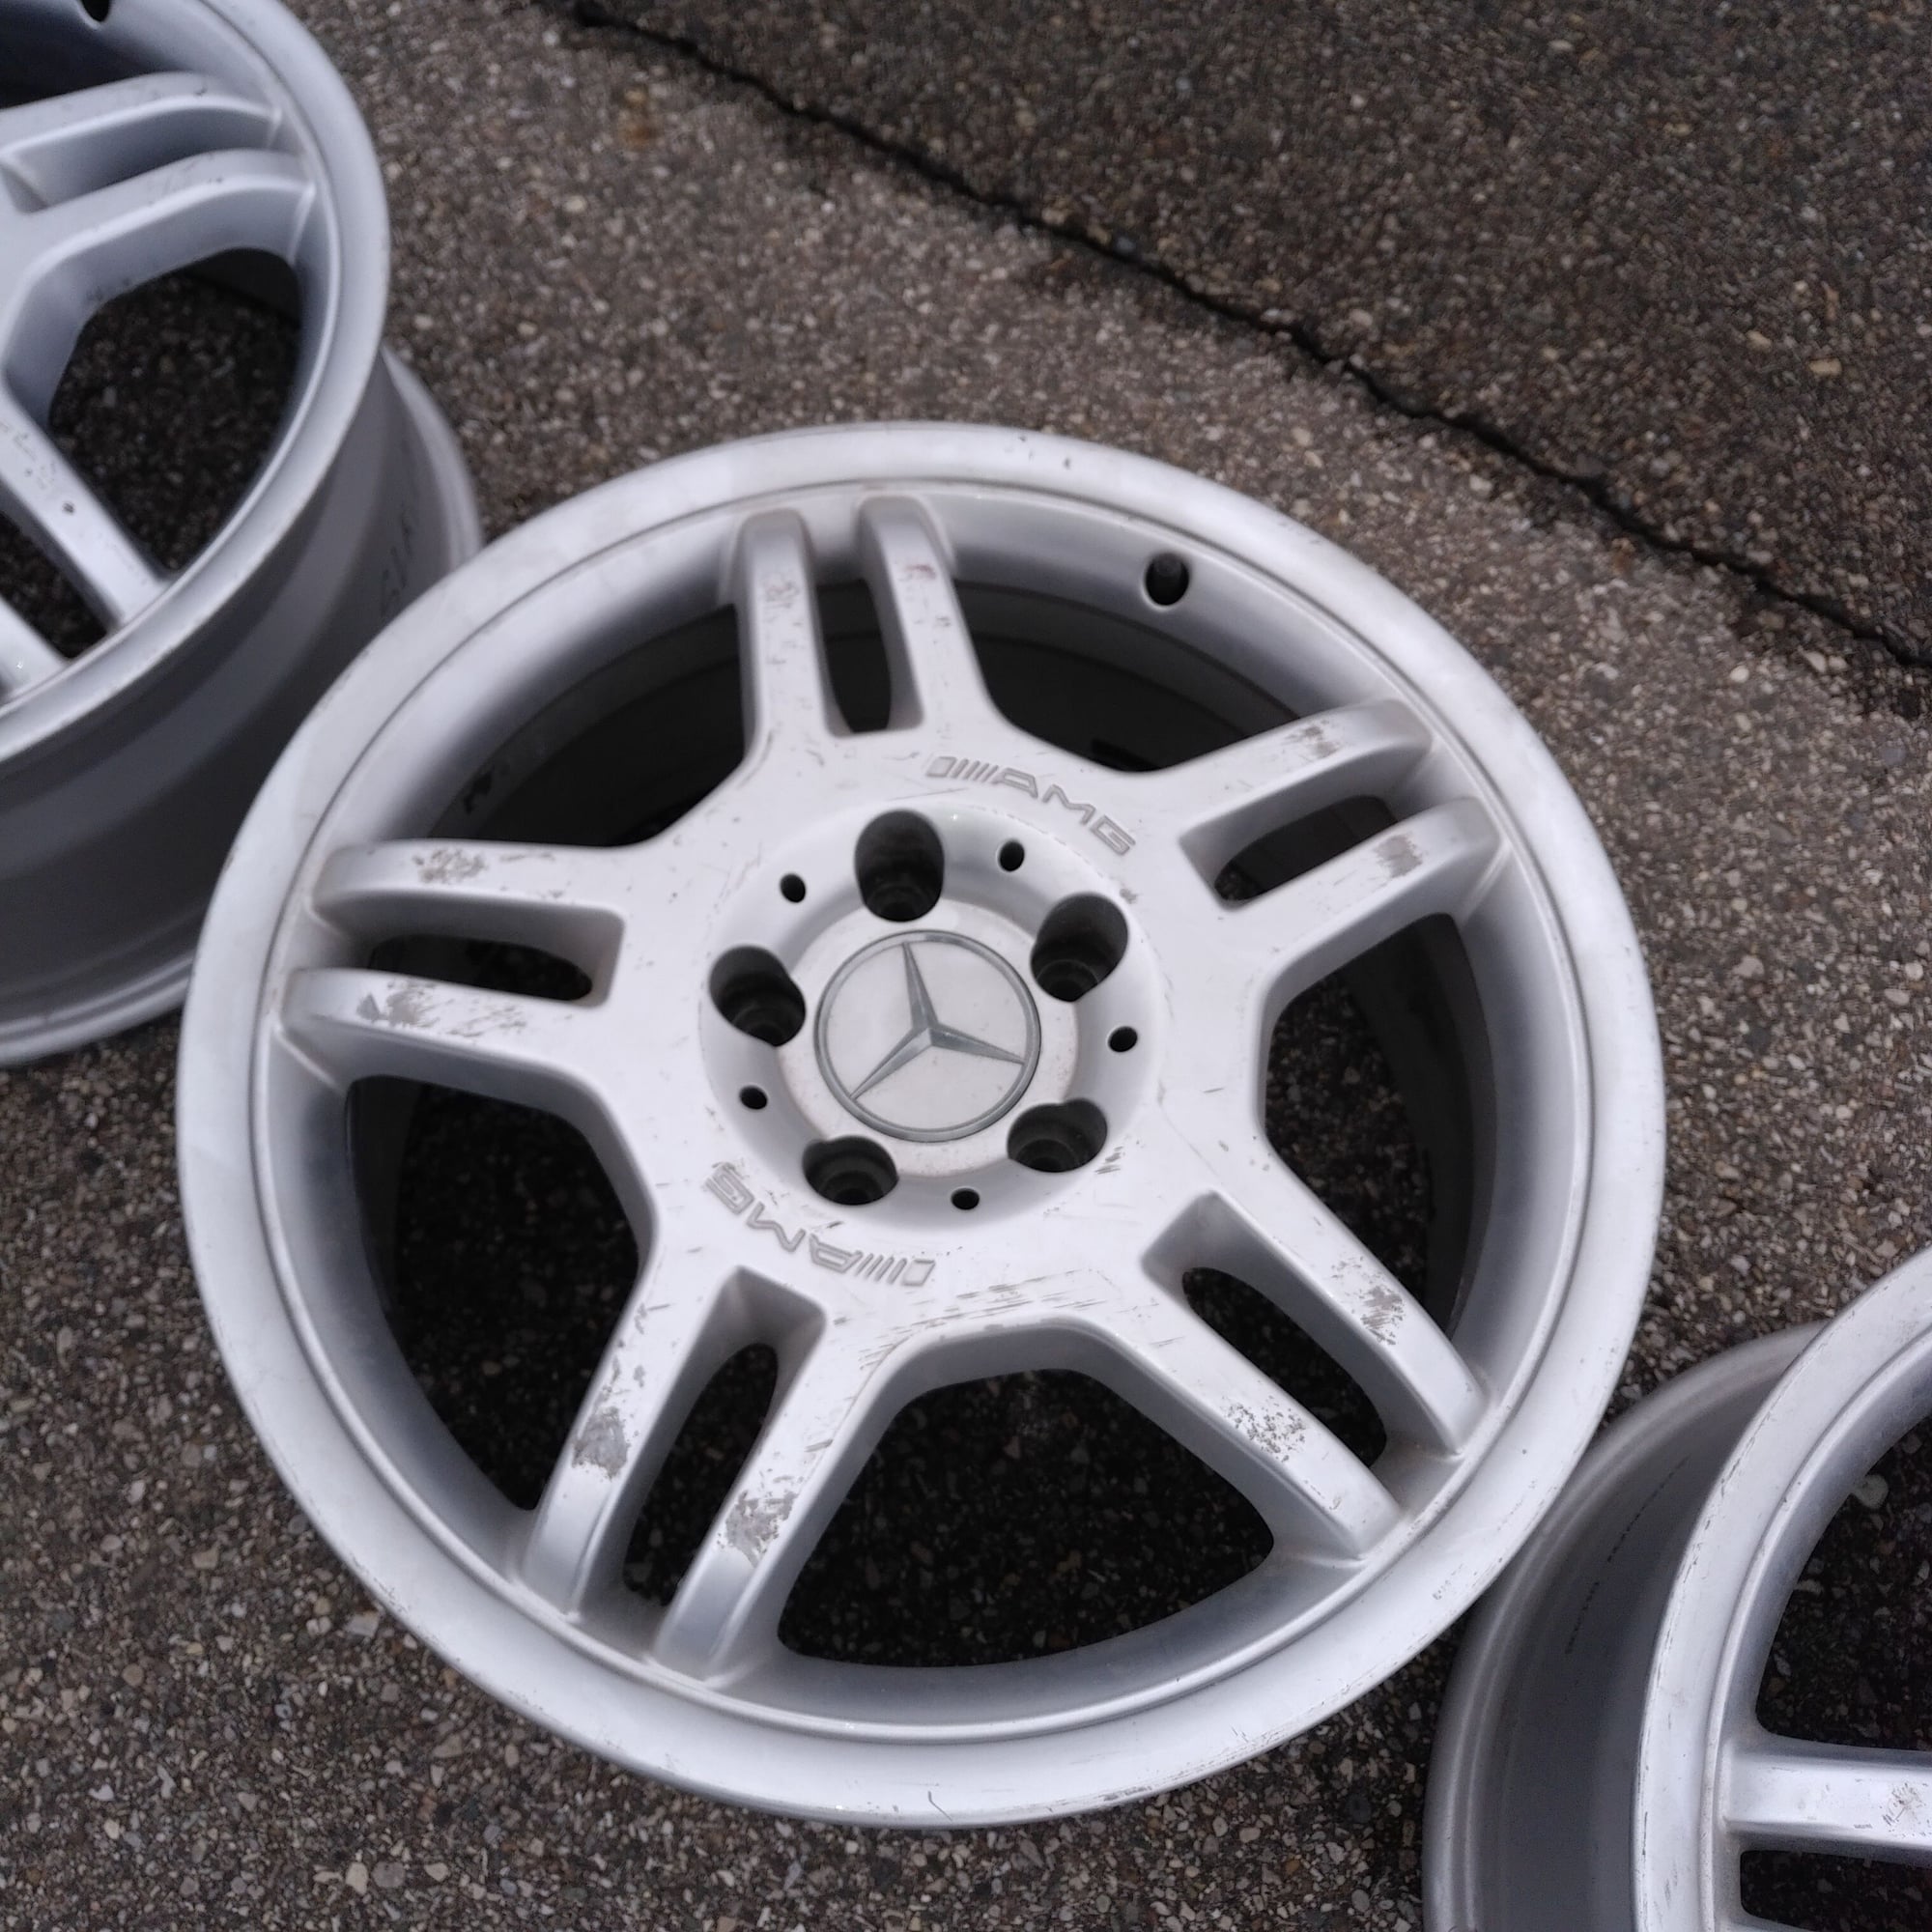 Wheels and Tires/Axles - AMG wheels from E63 and others - New - 2002 to 2010 Mercedes-Benz E63 AMG - Birmingham, MI 48009, United States